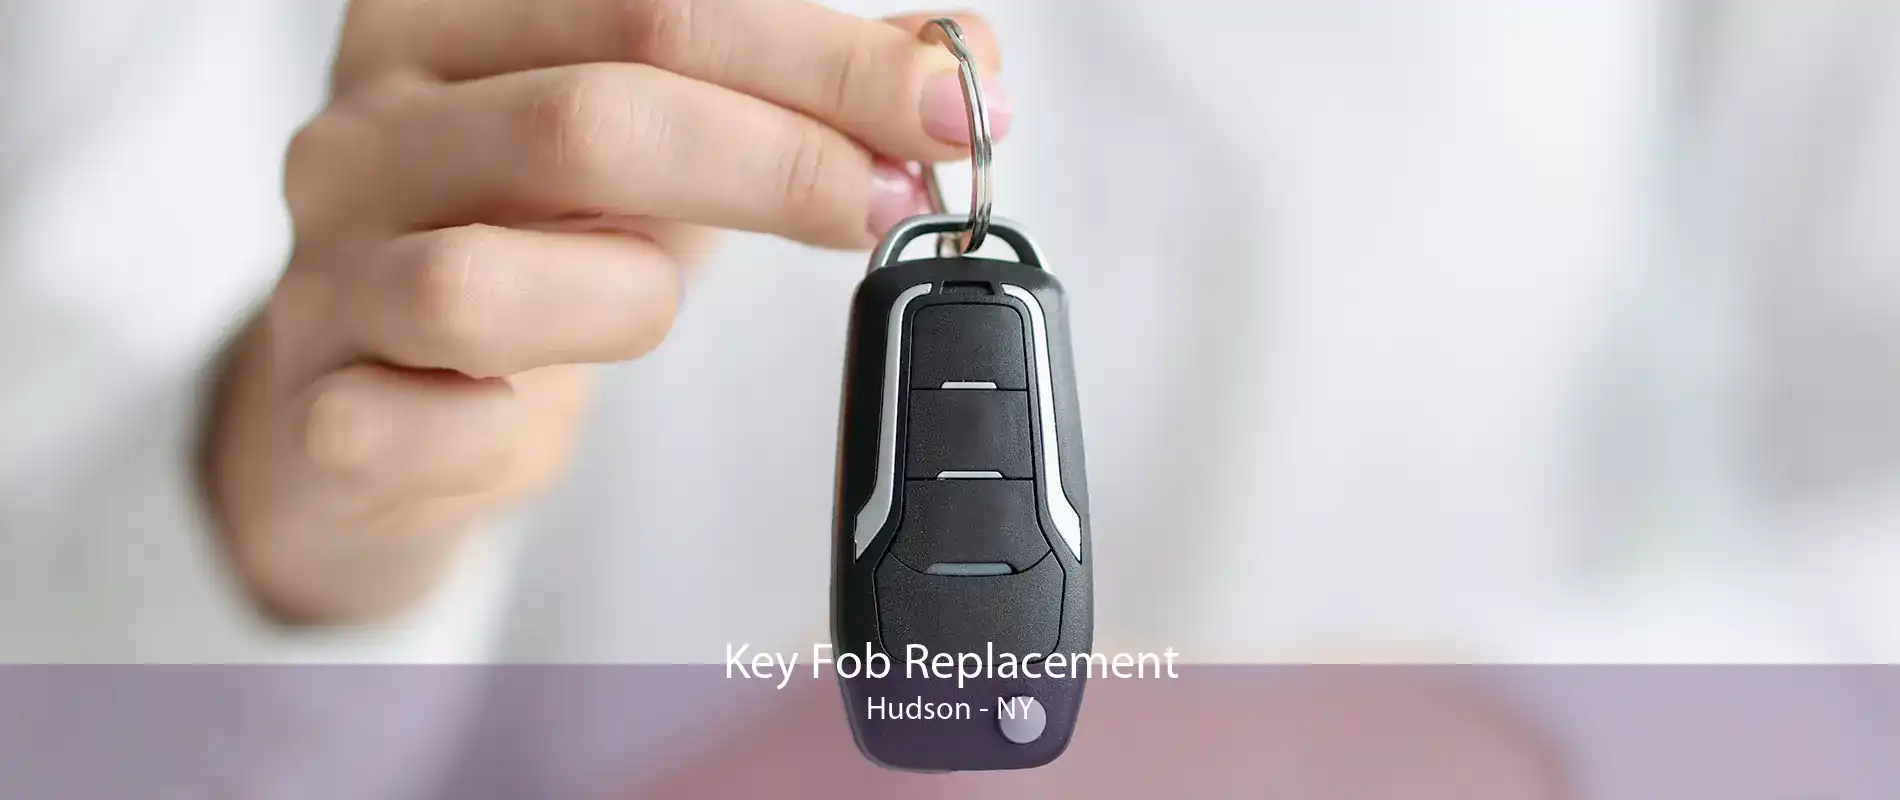 Key Fob Replacement Hudson - NY